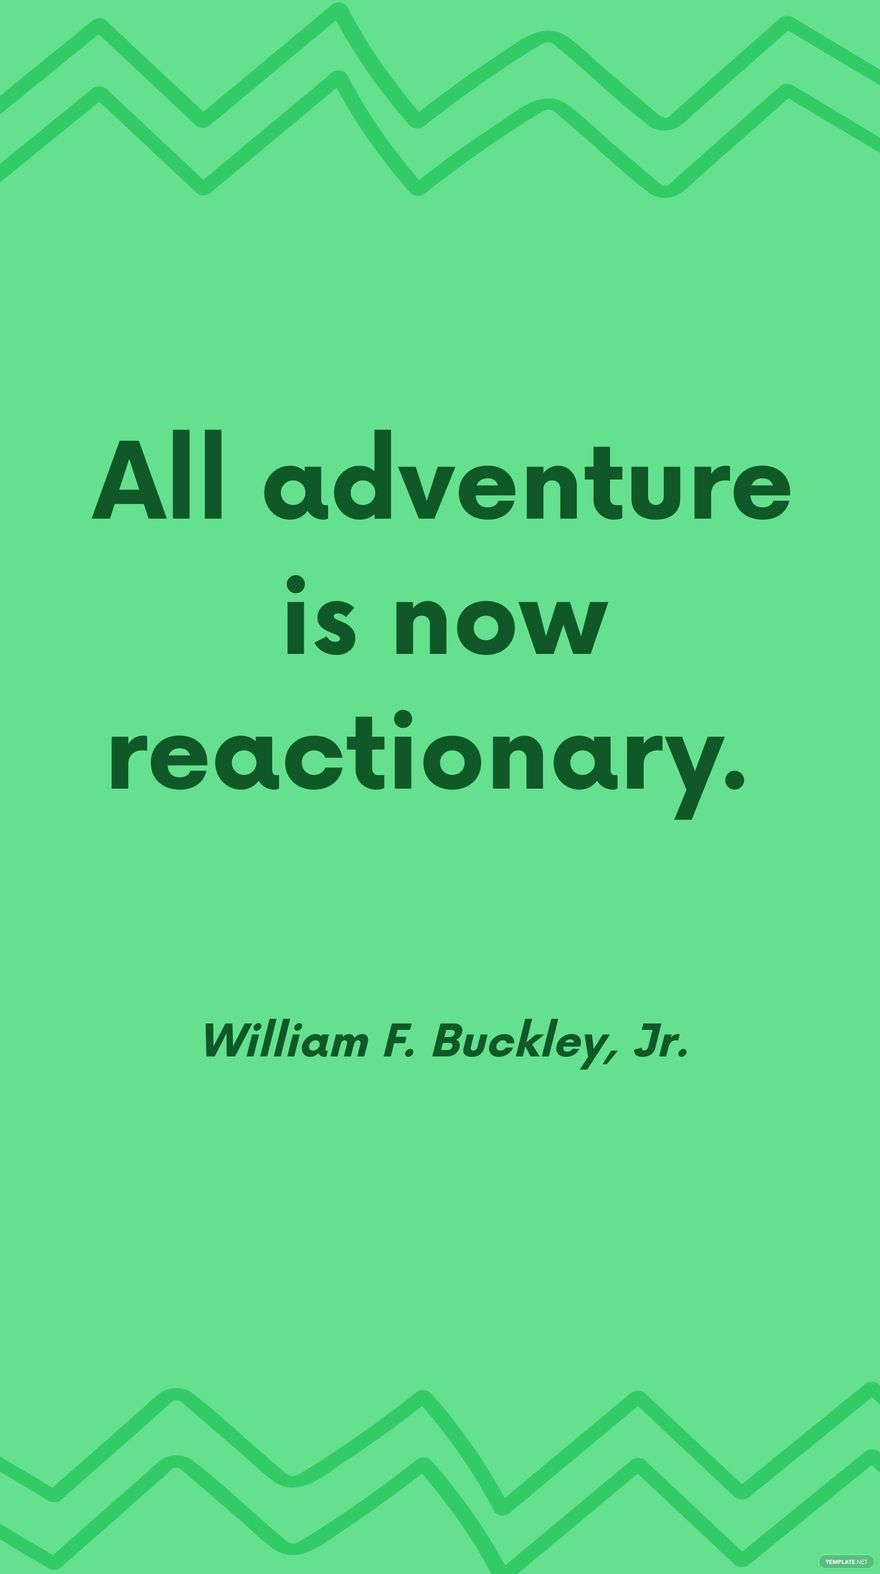 William F. Buckley, Jr. - All adventure is now reactionary.